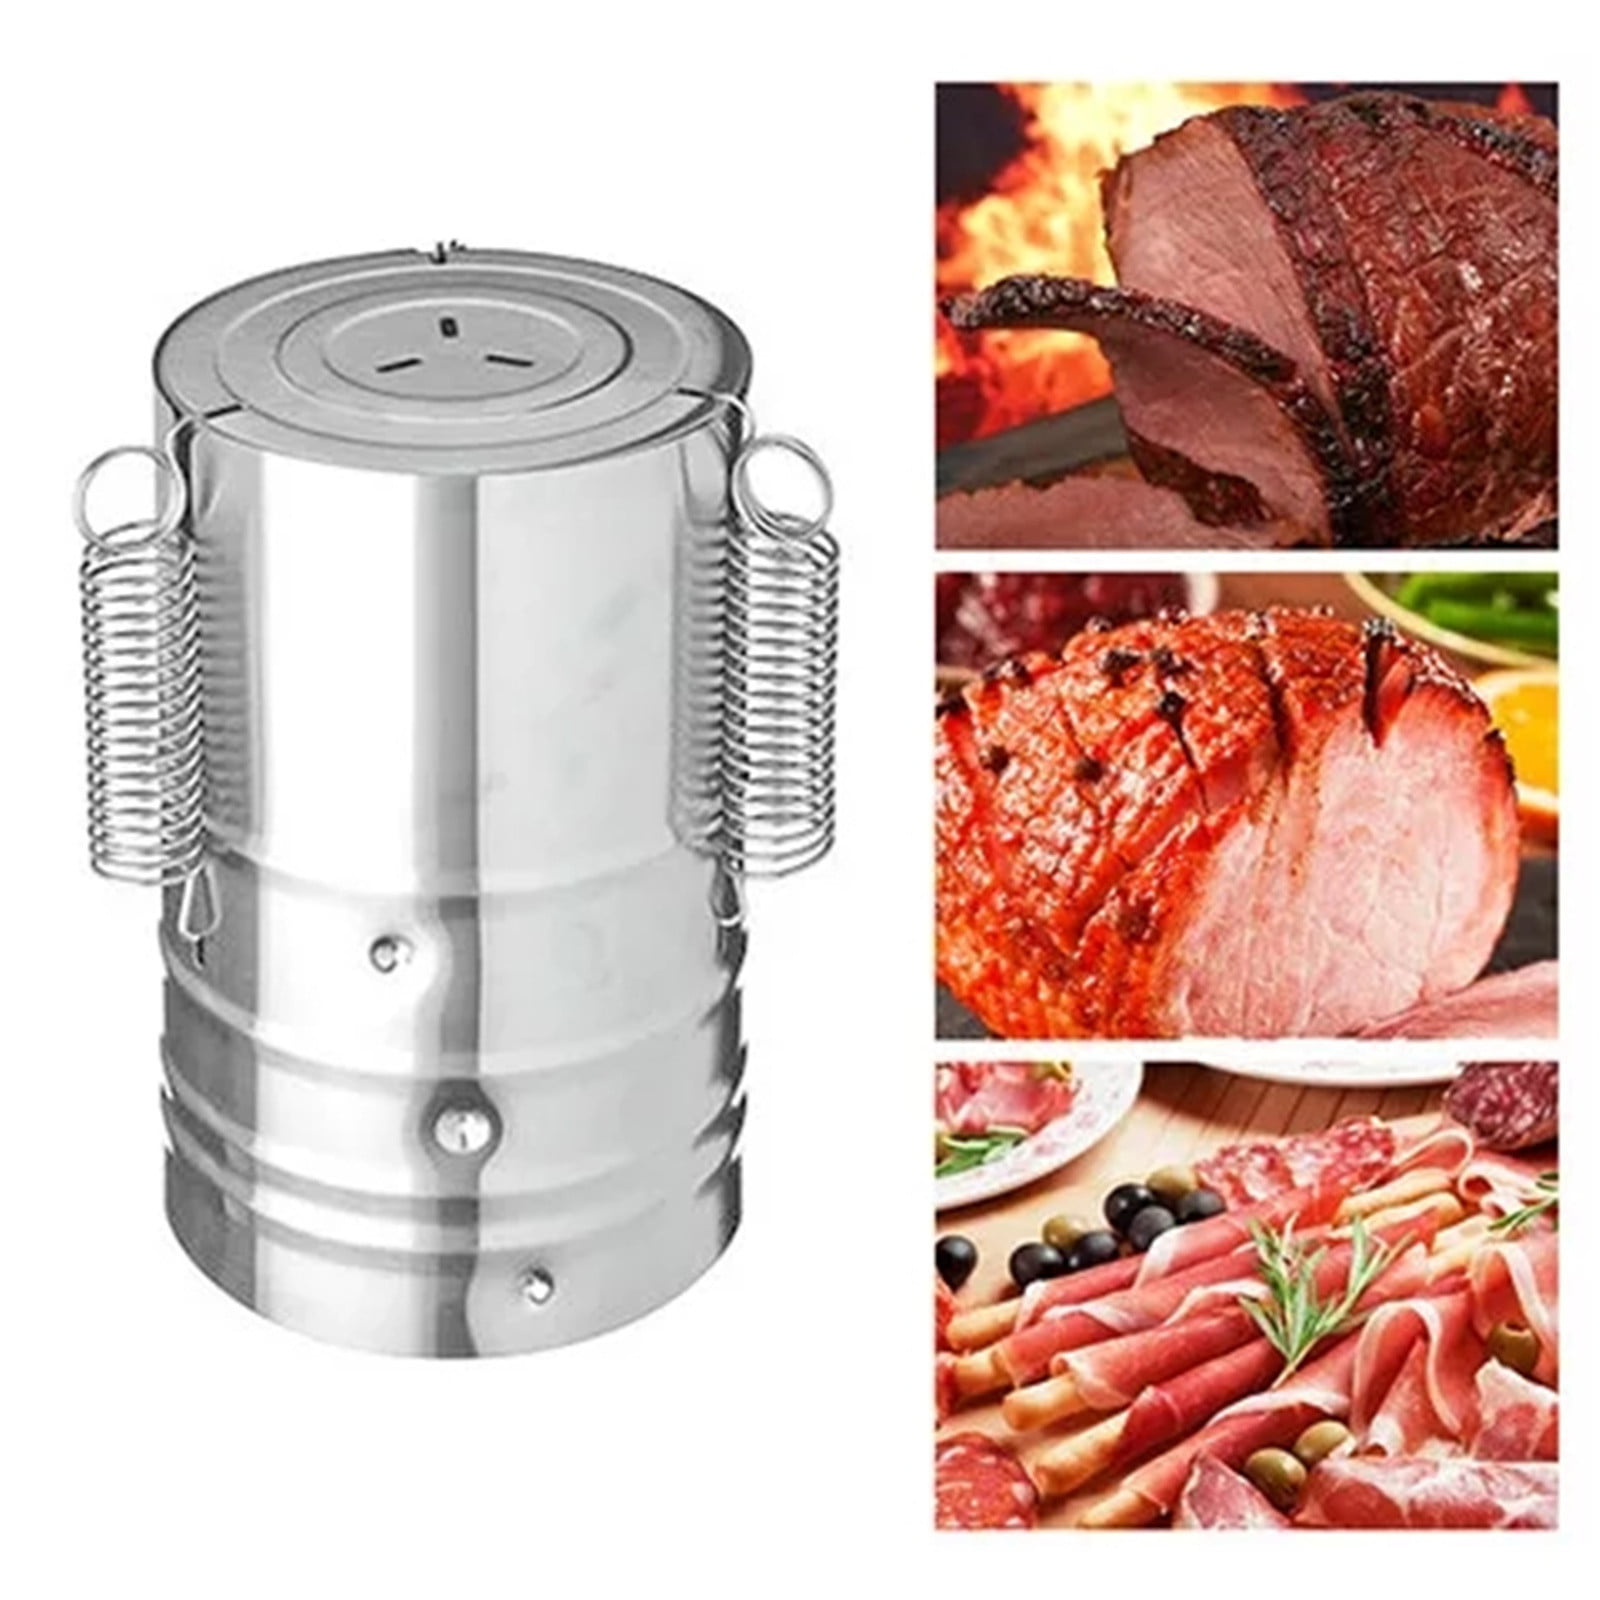 JDOQOKJ Ham Maker Stainless Steel Meat Press with Thermometer ,and 5 Pack ziplocks, for Making Deli Meat, Homemade Lunch Meat. Meat Press Mold for